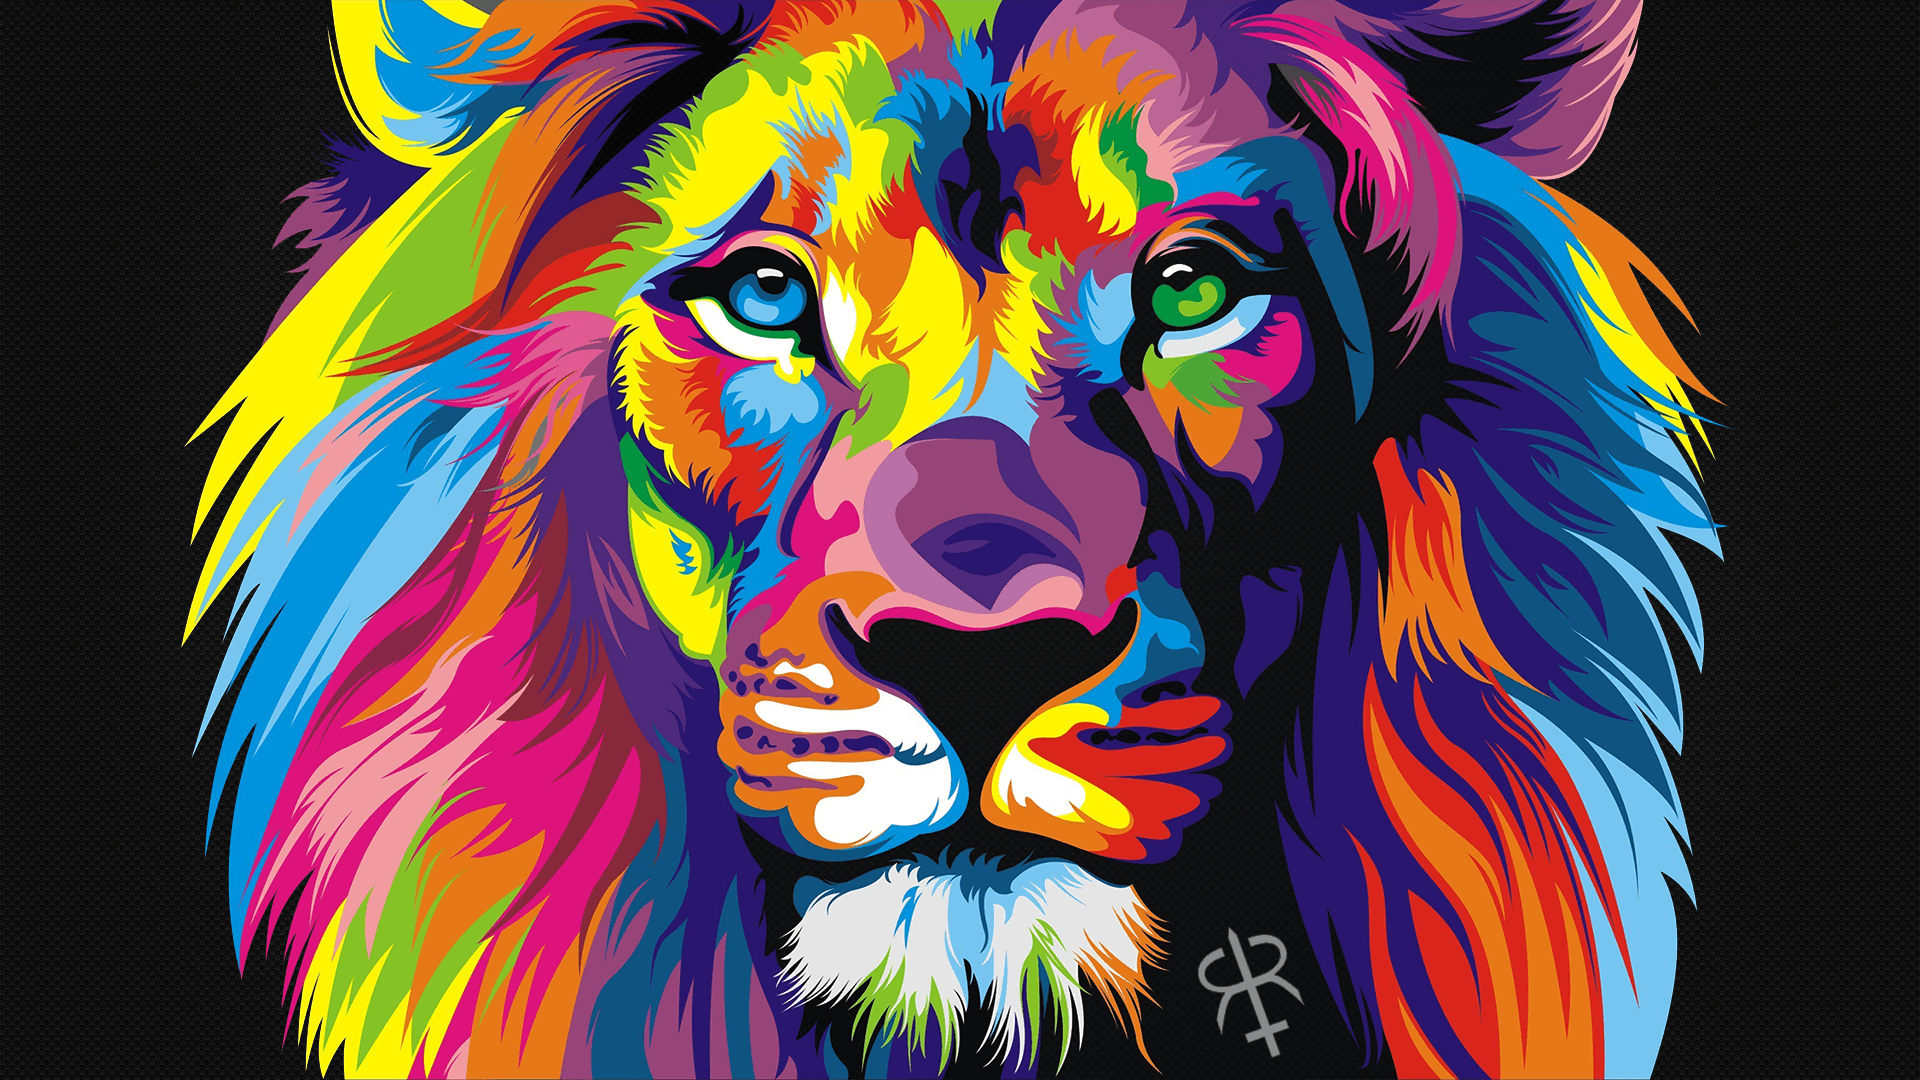 King of colours Full HD Wallpaper and Background Imagex1080